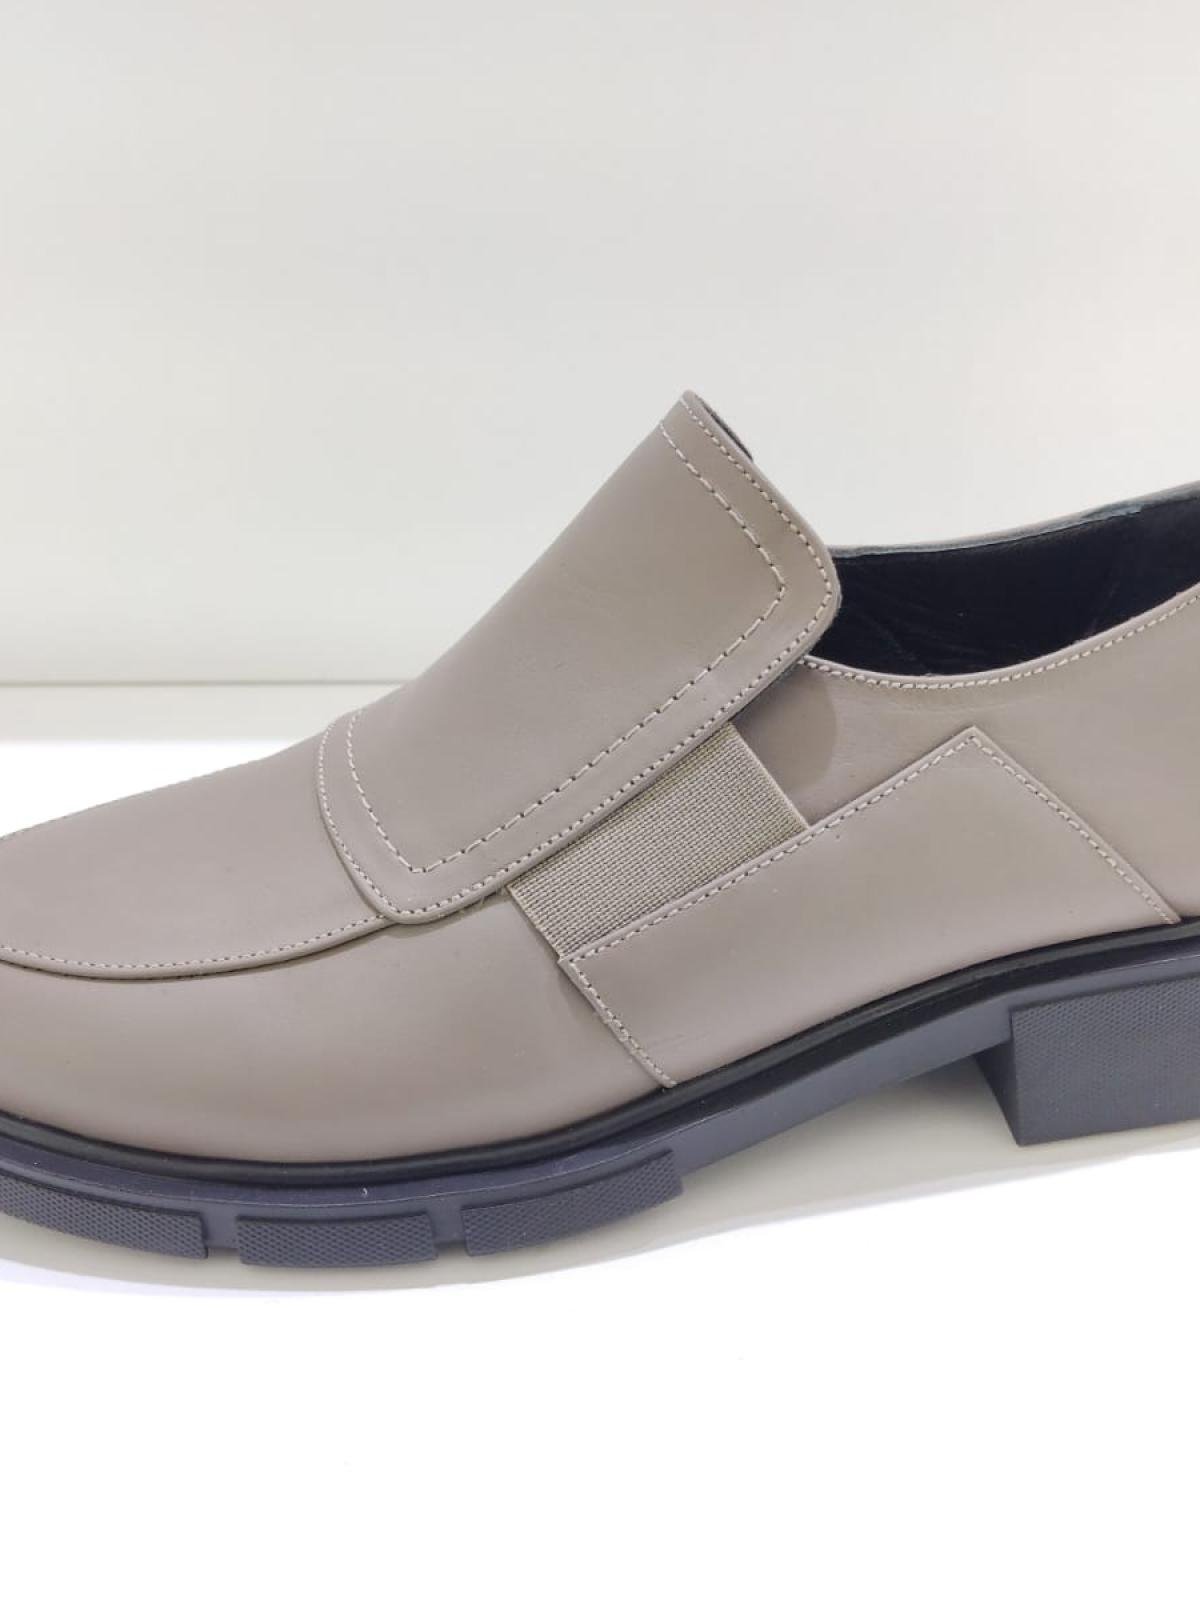 Women leather loafers wholesale Stone color | From Turkey